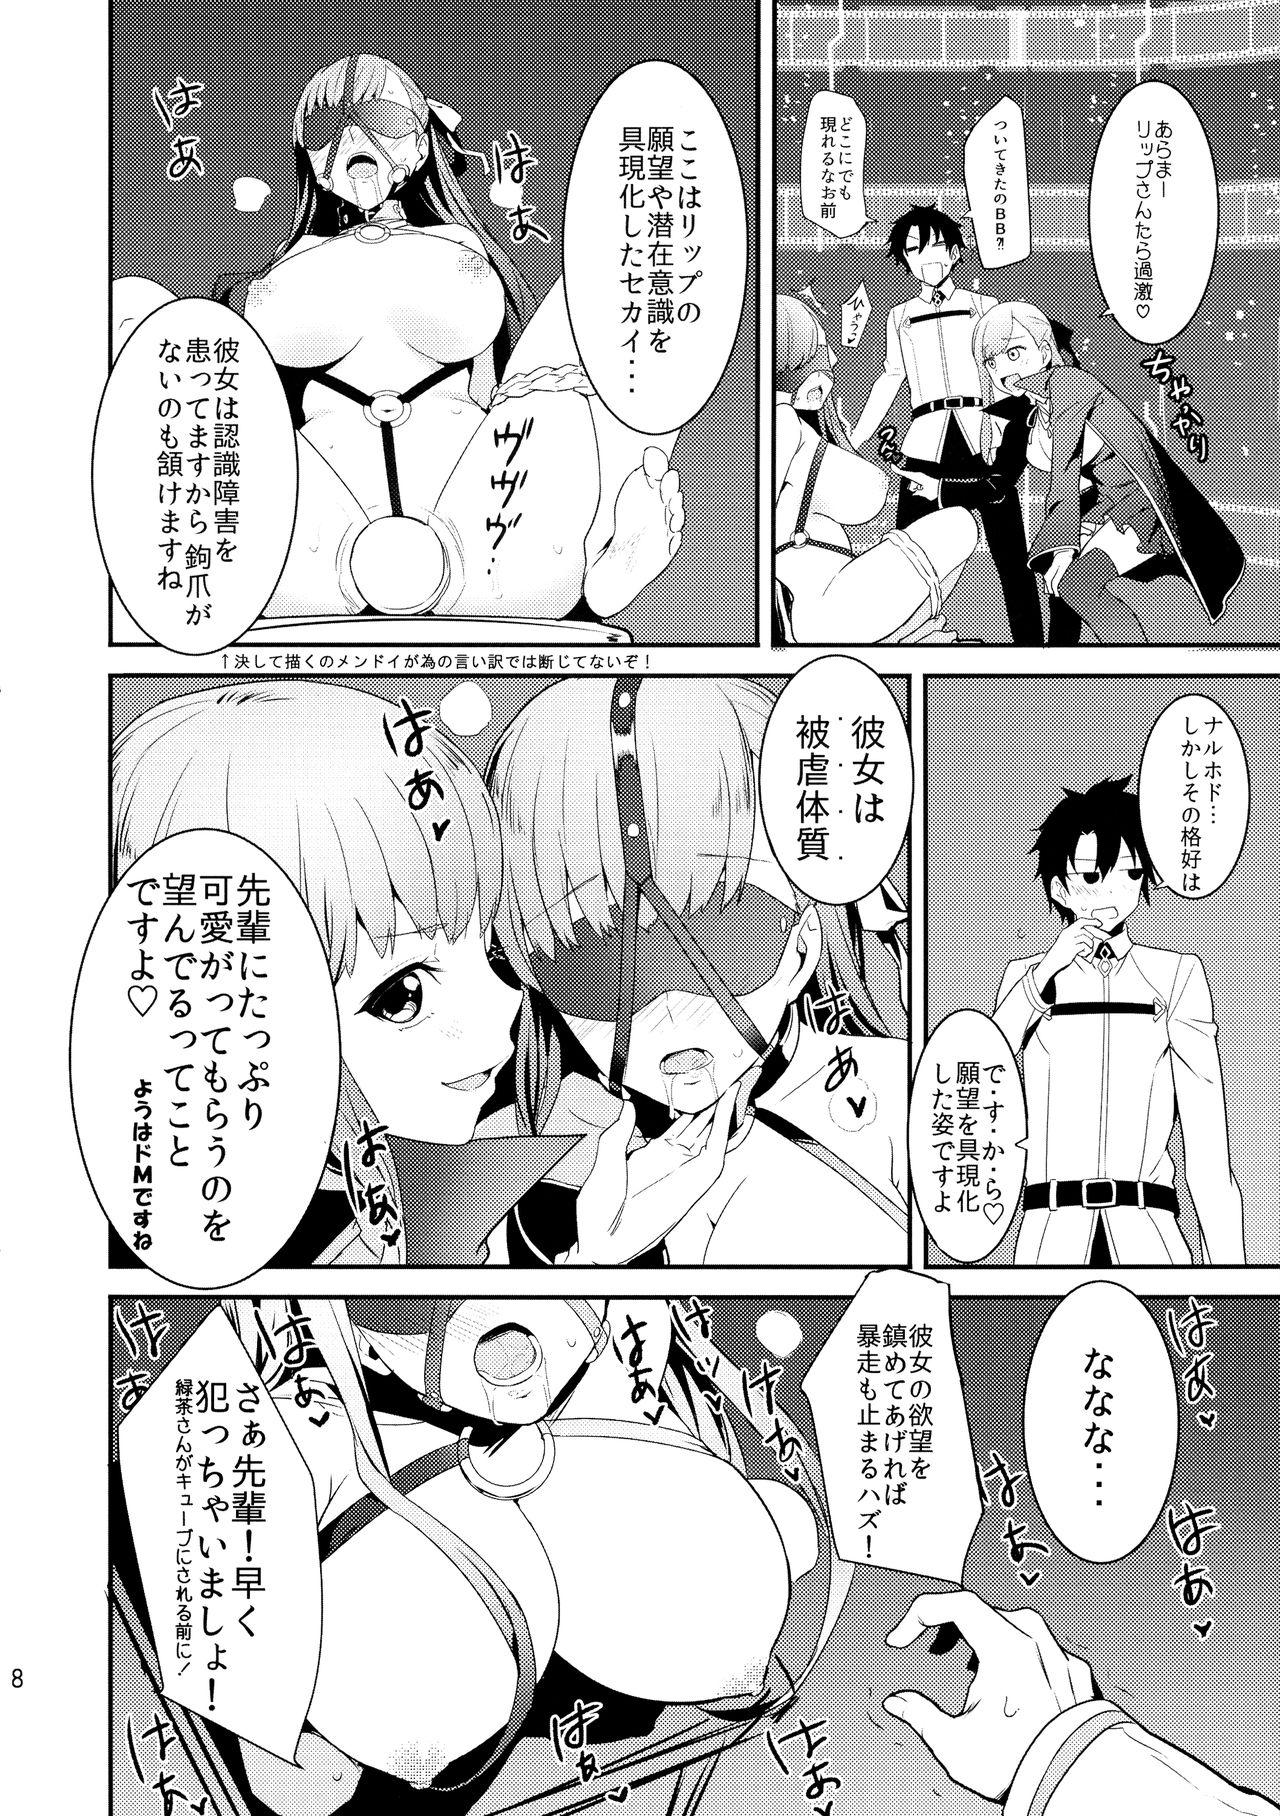 Ecuador In the Passion, Melty heart. 1 - Fate grand order Anale - Page 10